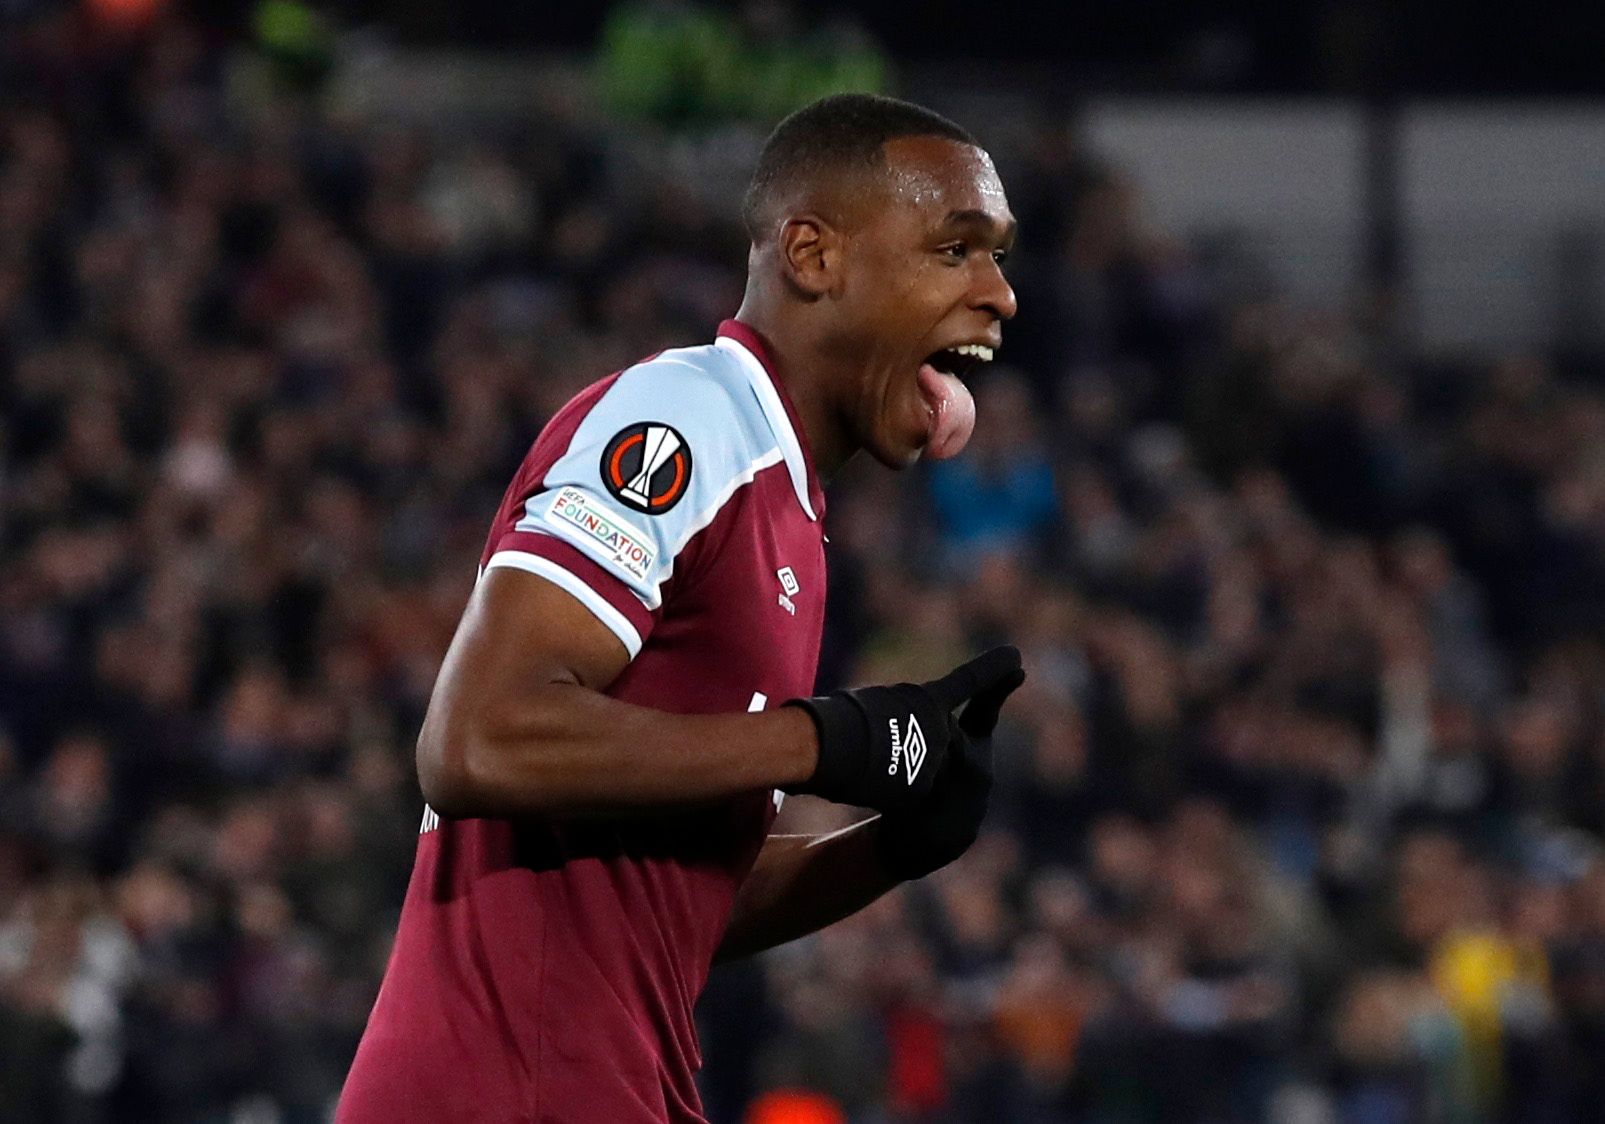 West Ham United defender Issa Diop in Europa League action